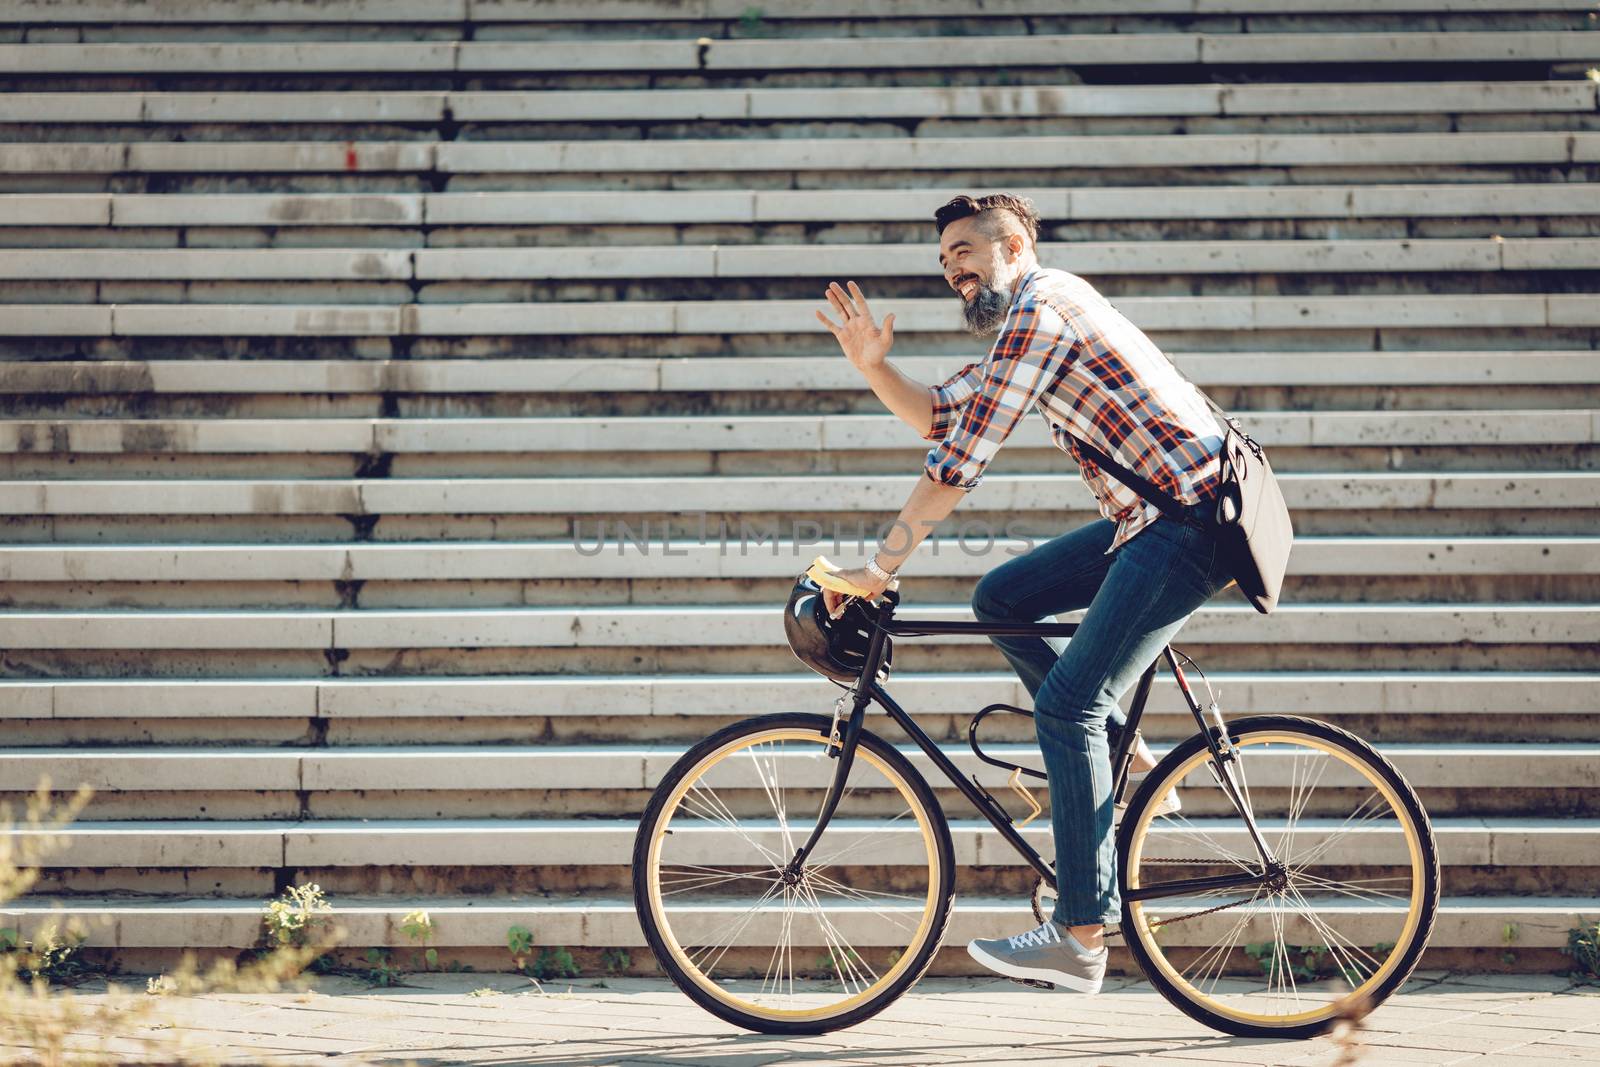 Casual handsome businessman going to work by bicycle. He is riding bike and waving Hello.